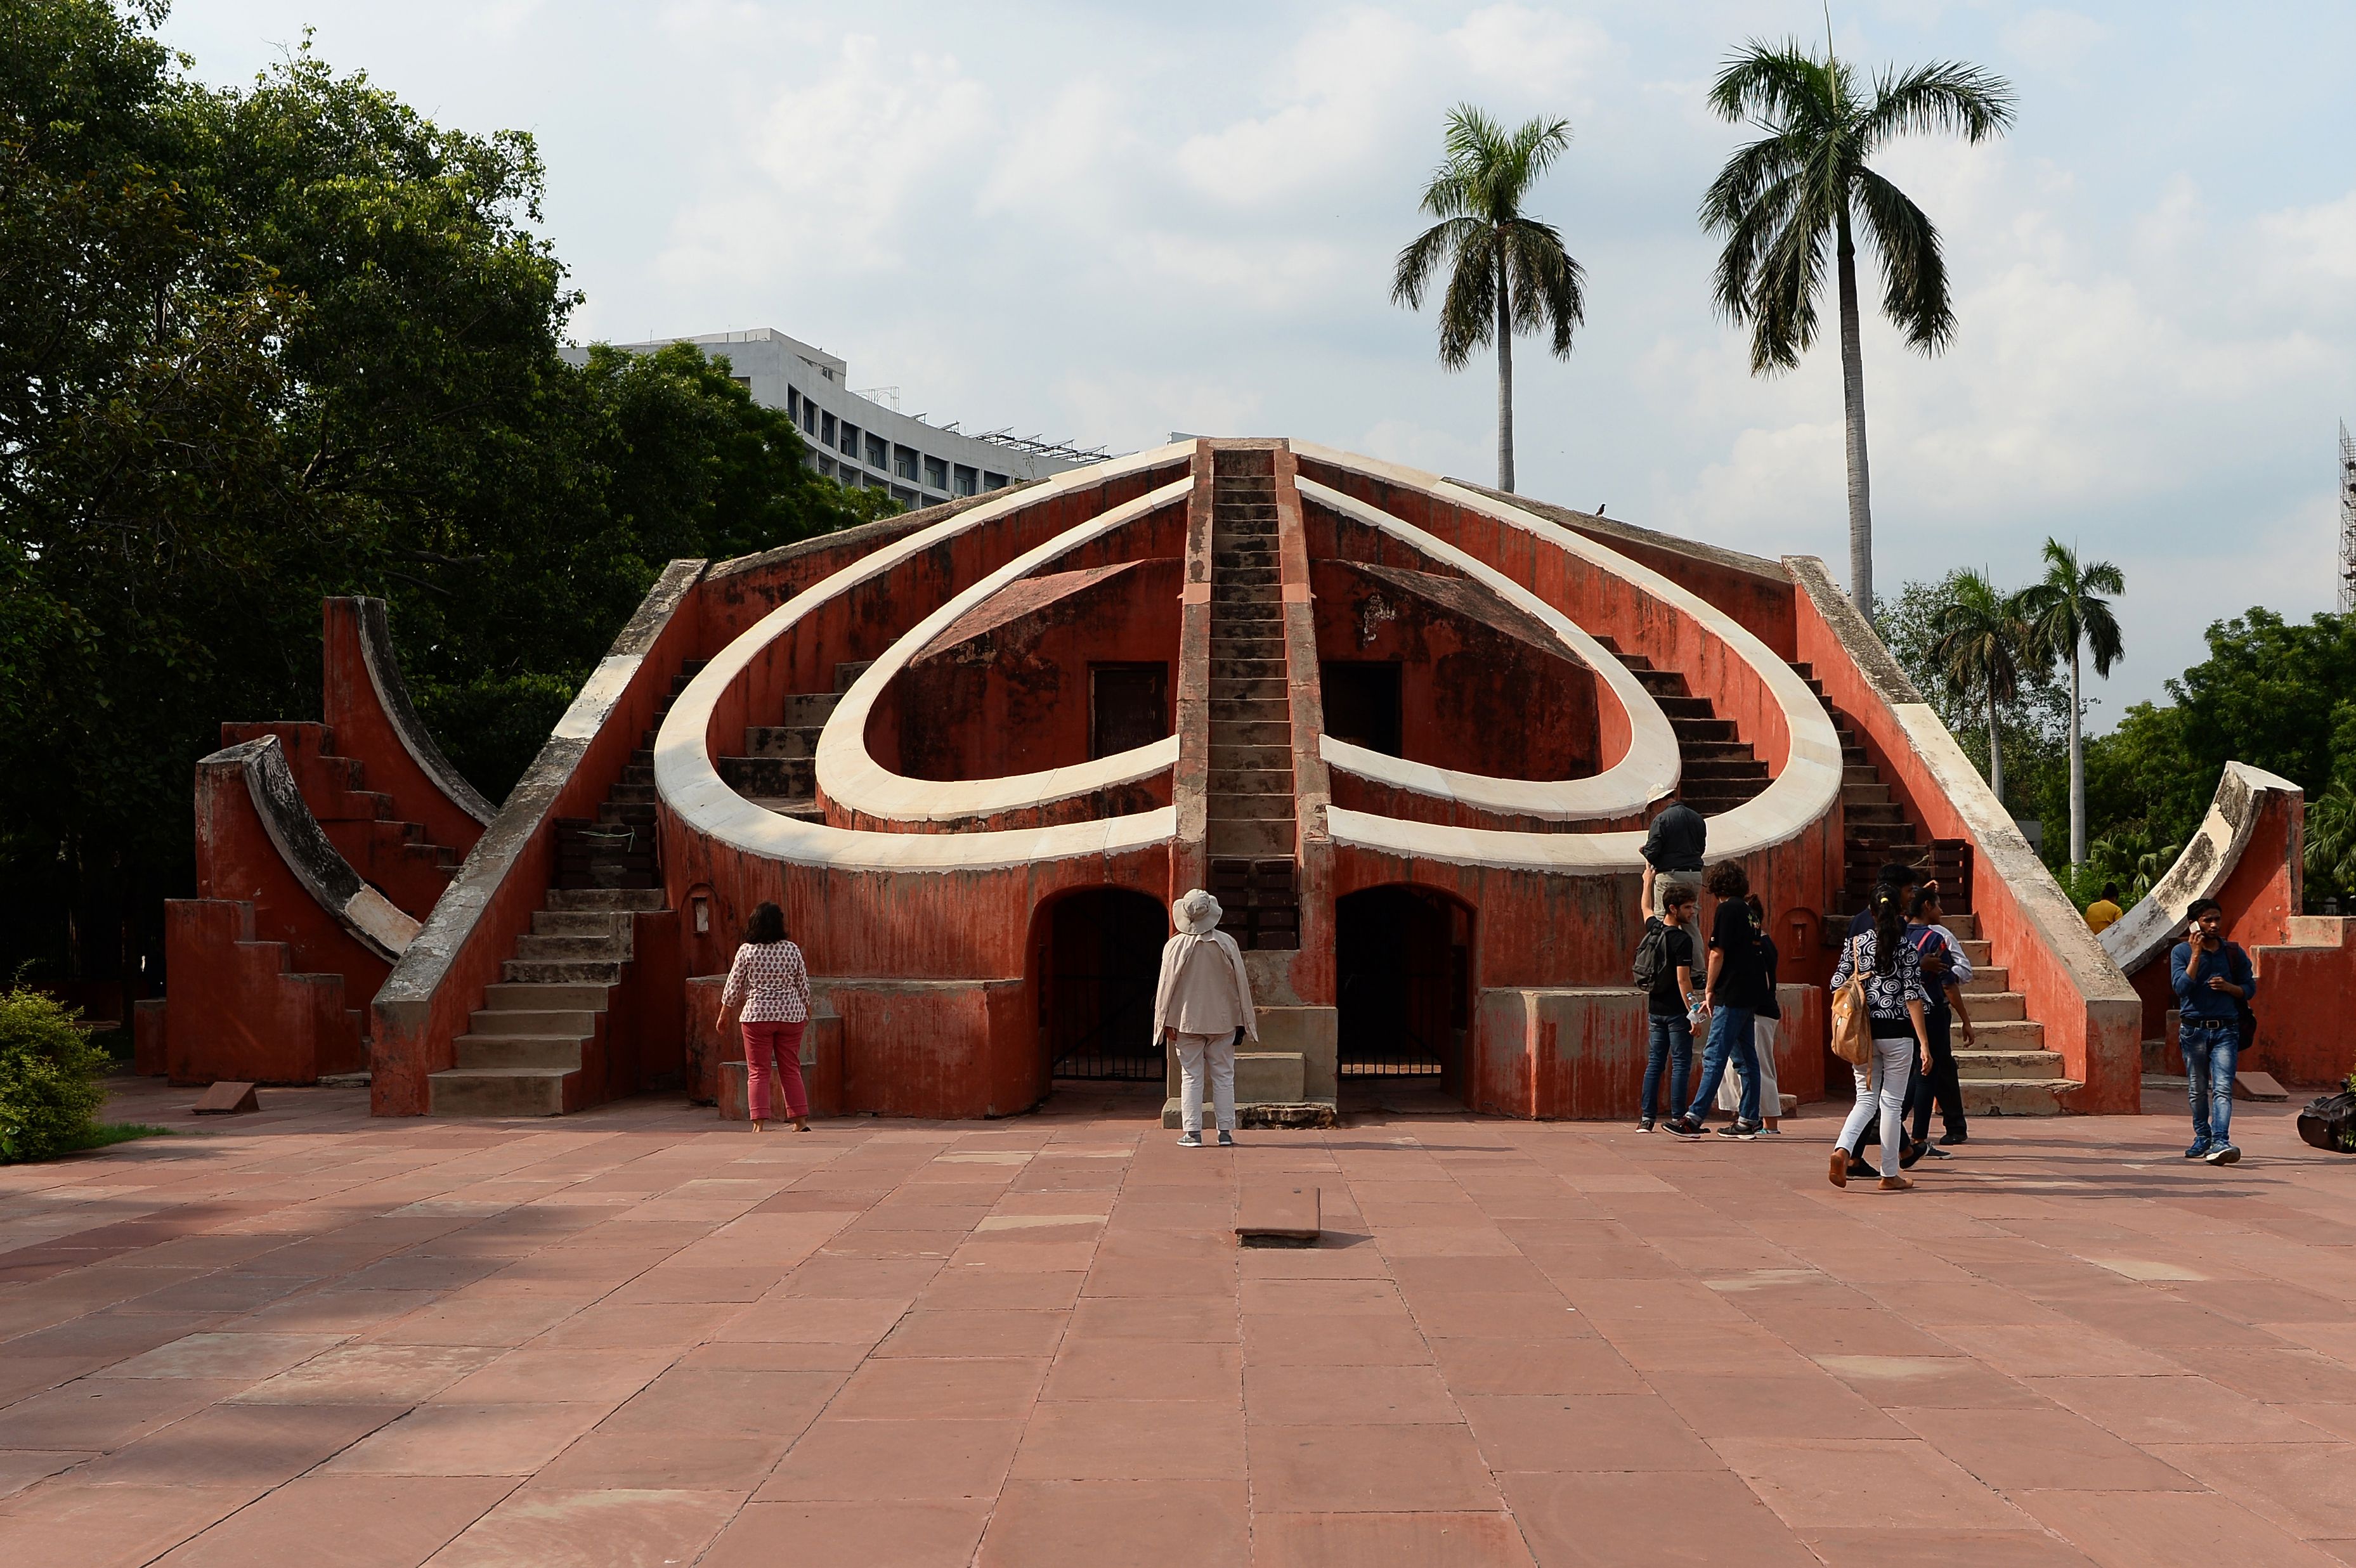 The structure of Jantar Mantar, where the inflammatory slogans were raised on Sunday